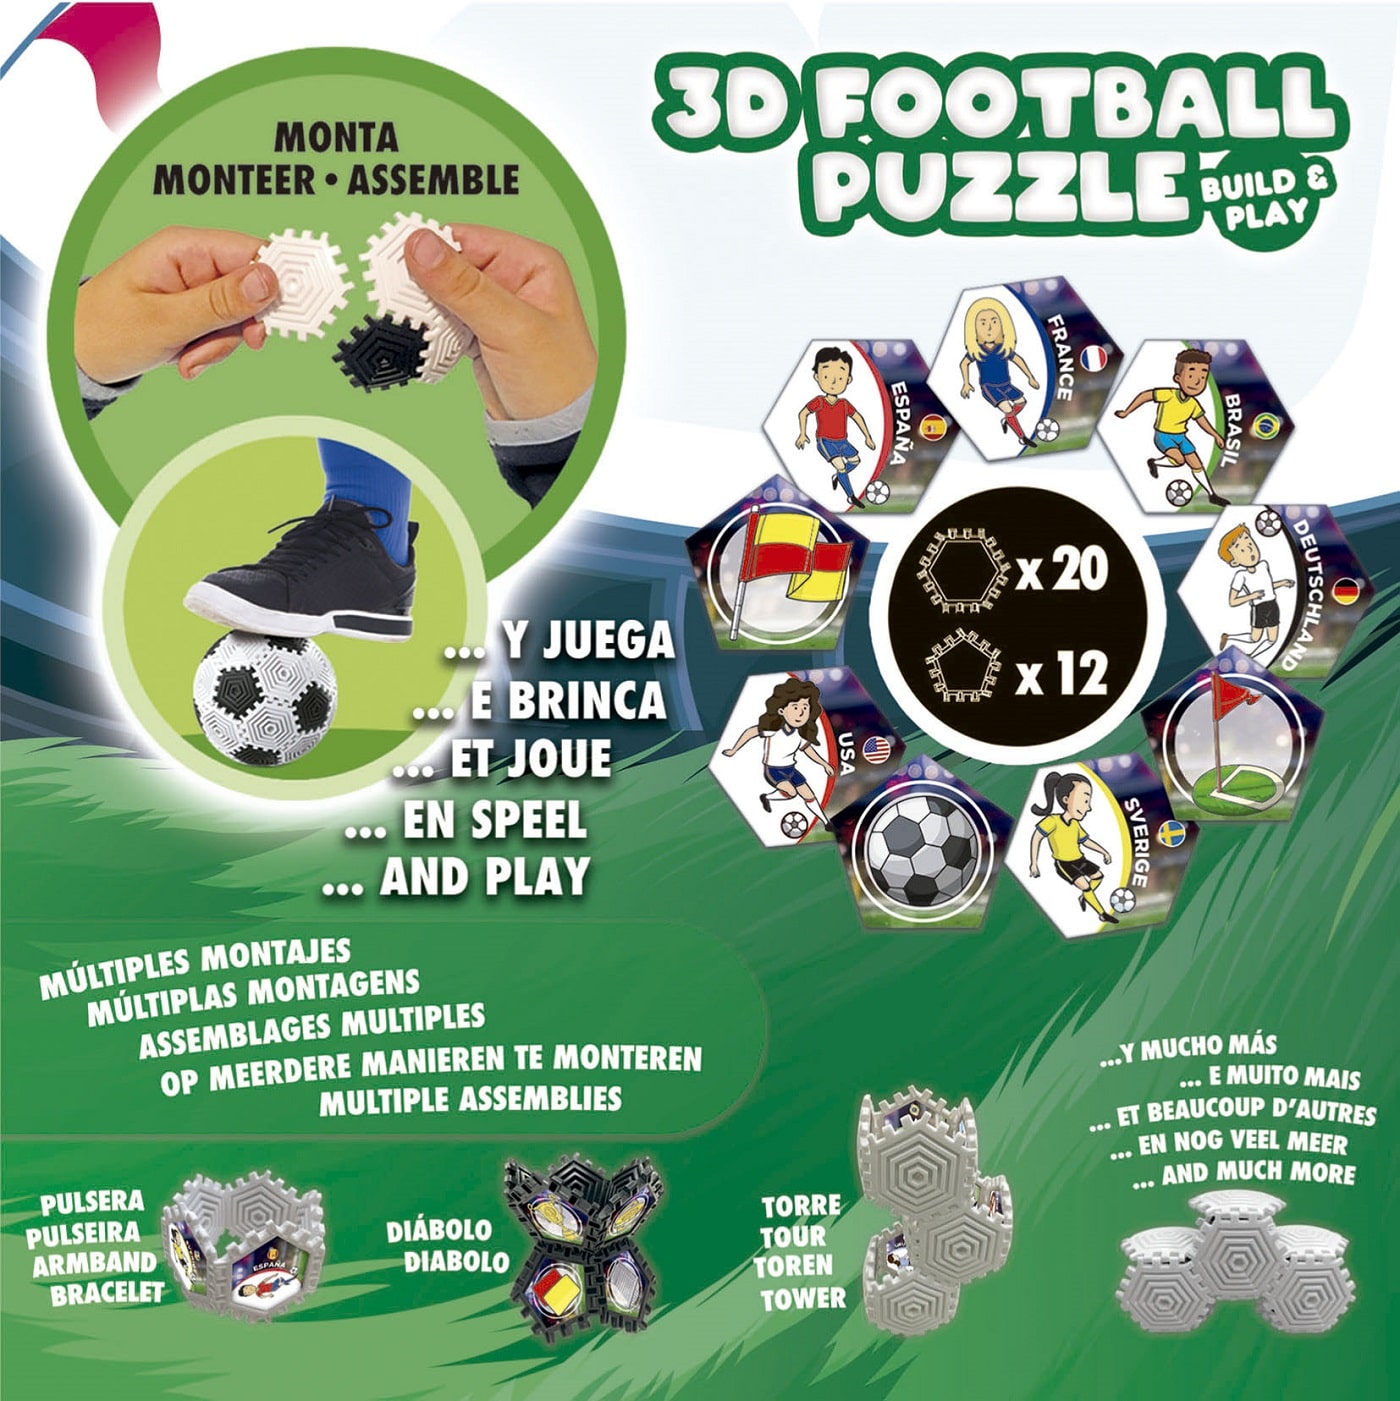 3D Football Puzzle Build and Play ( Educa 19210 ) imagen b